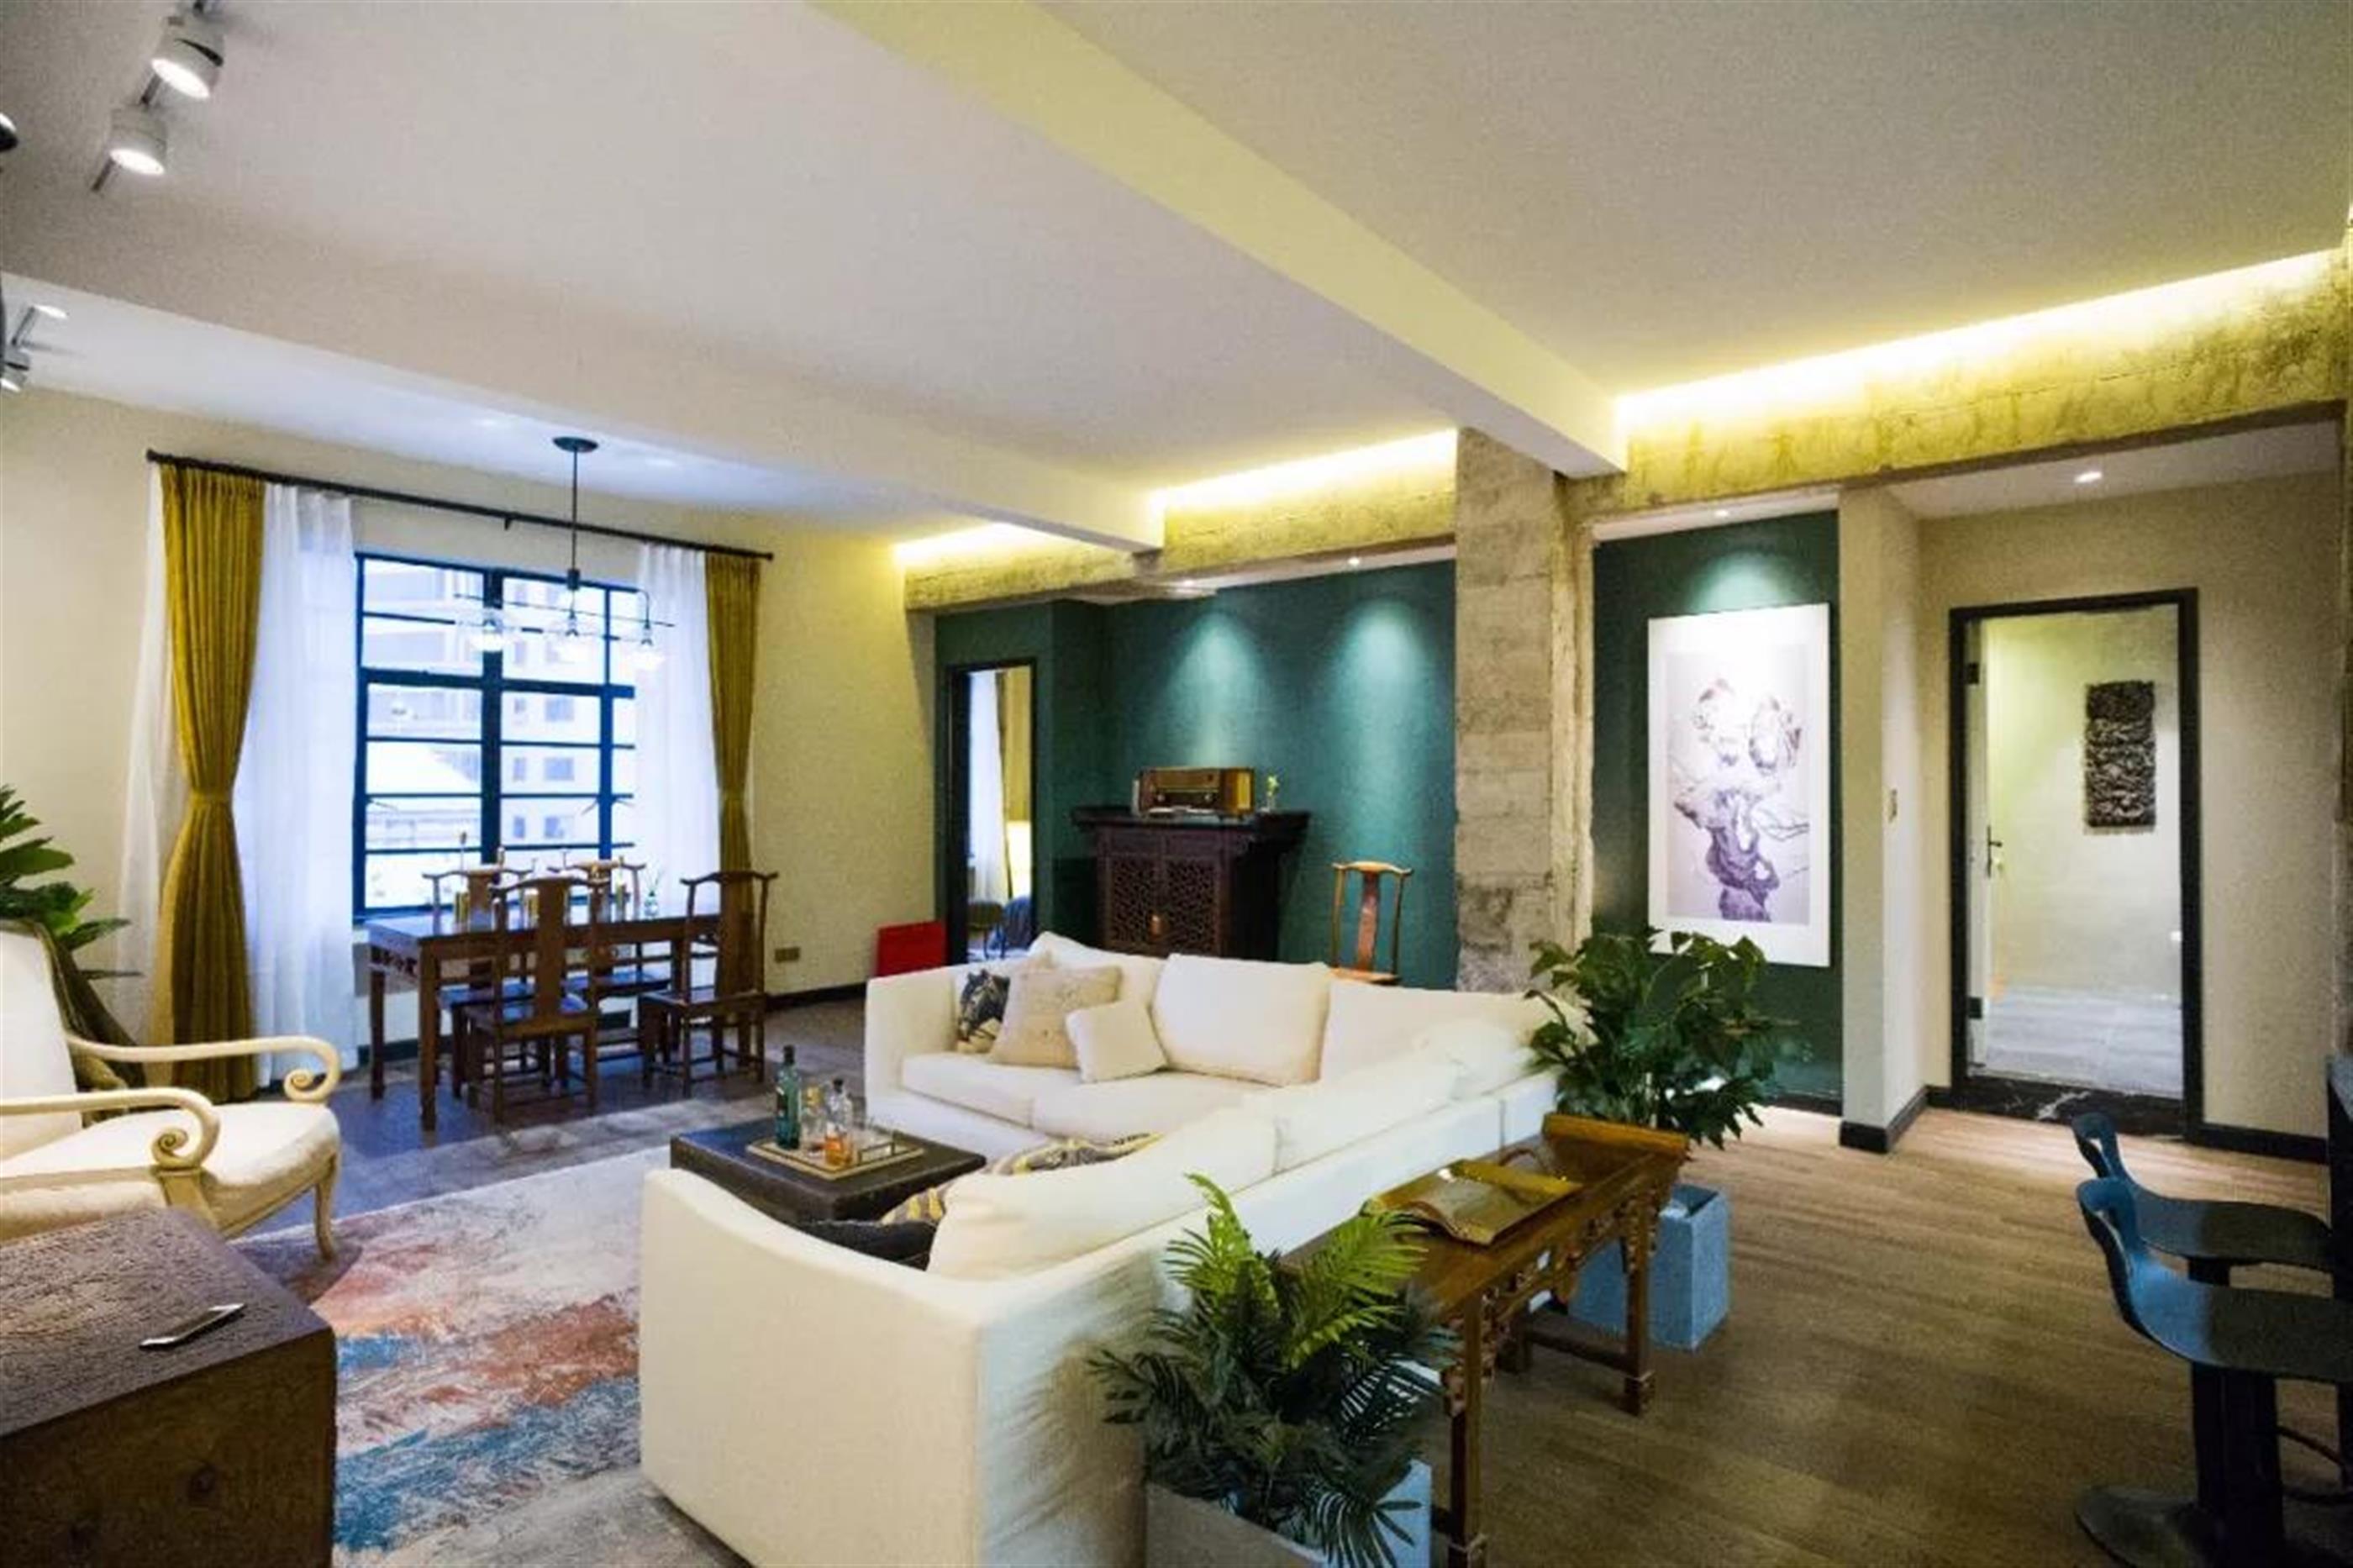 nice floors Historic High-Quality 4BR Lane House Apartment nr LN 2/12/13 for Rent in Shanghai